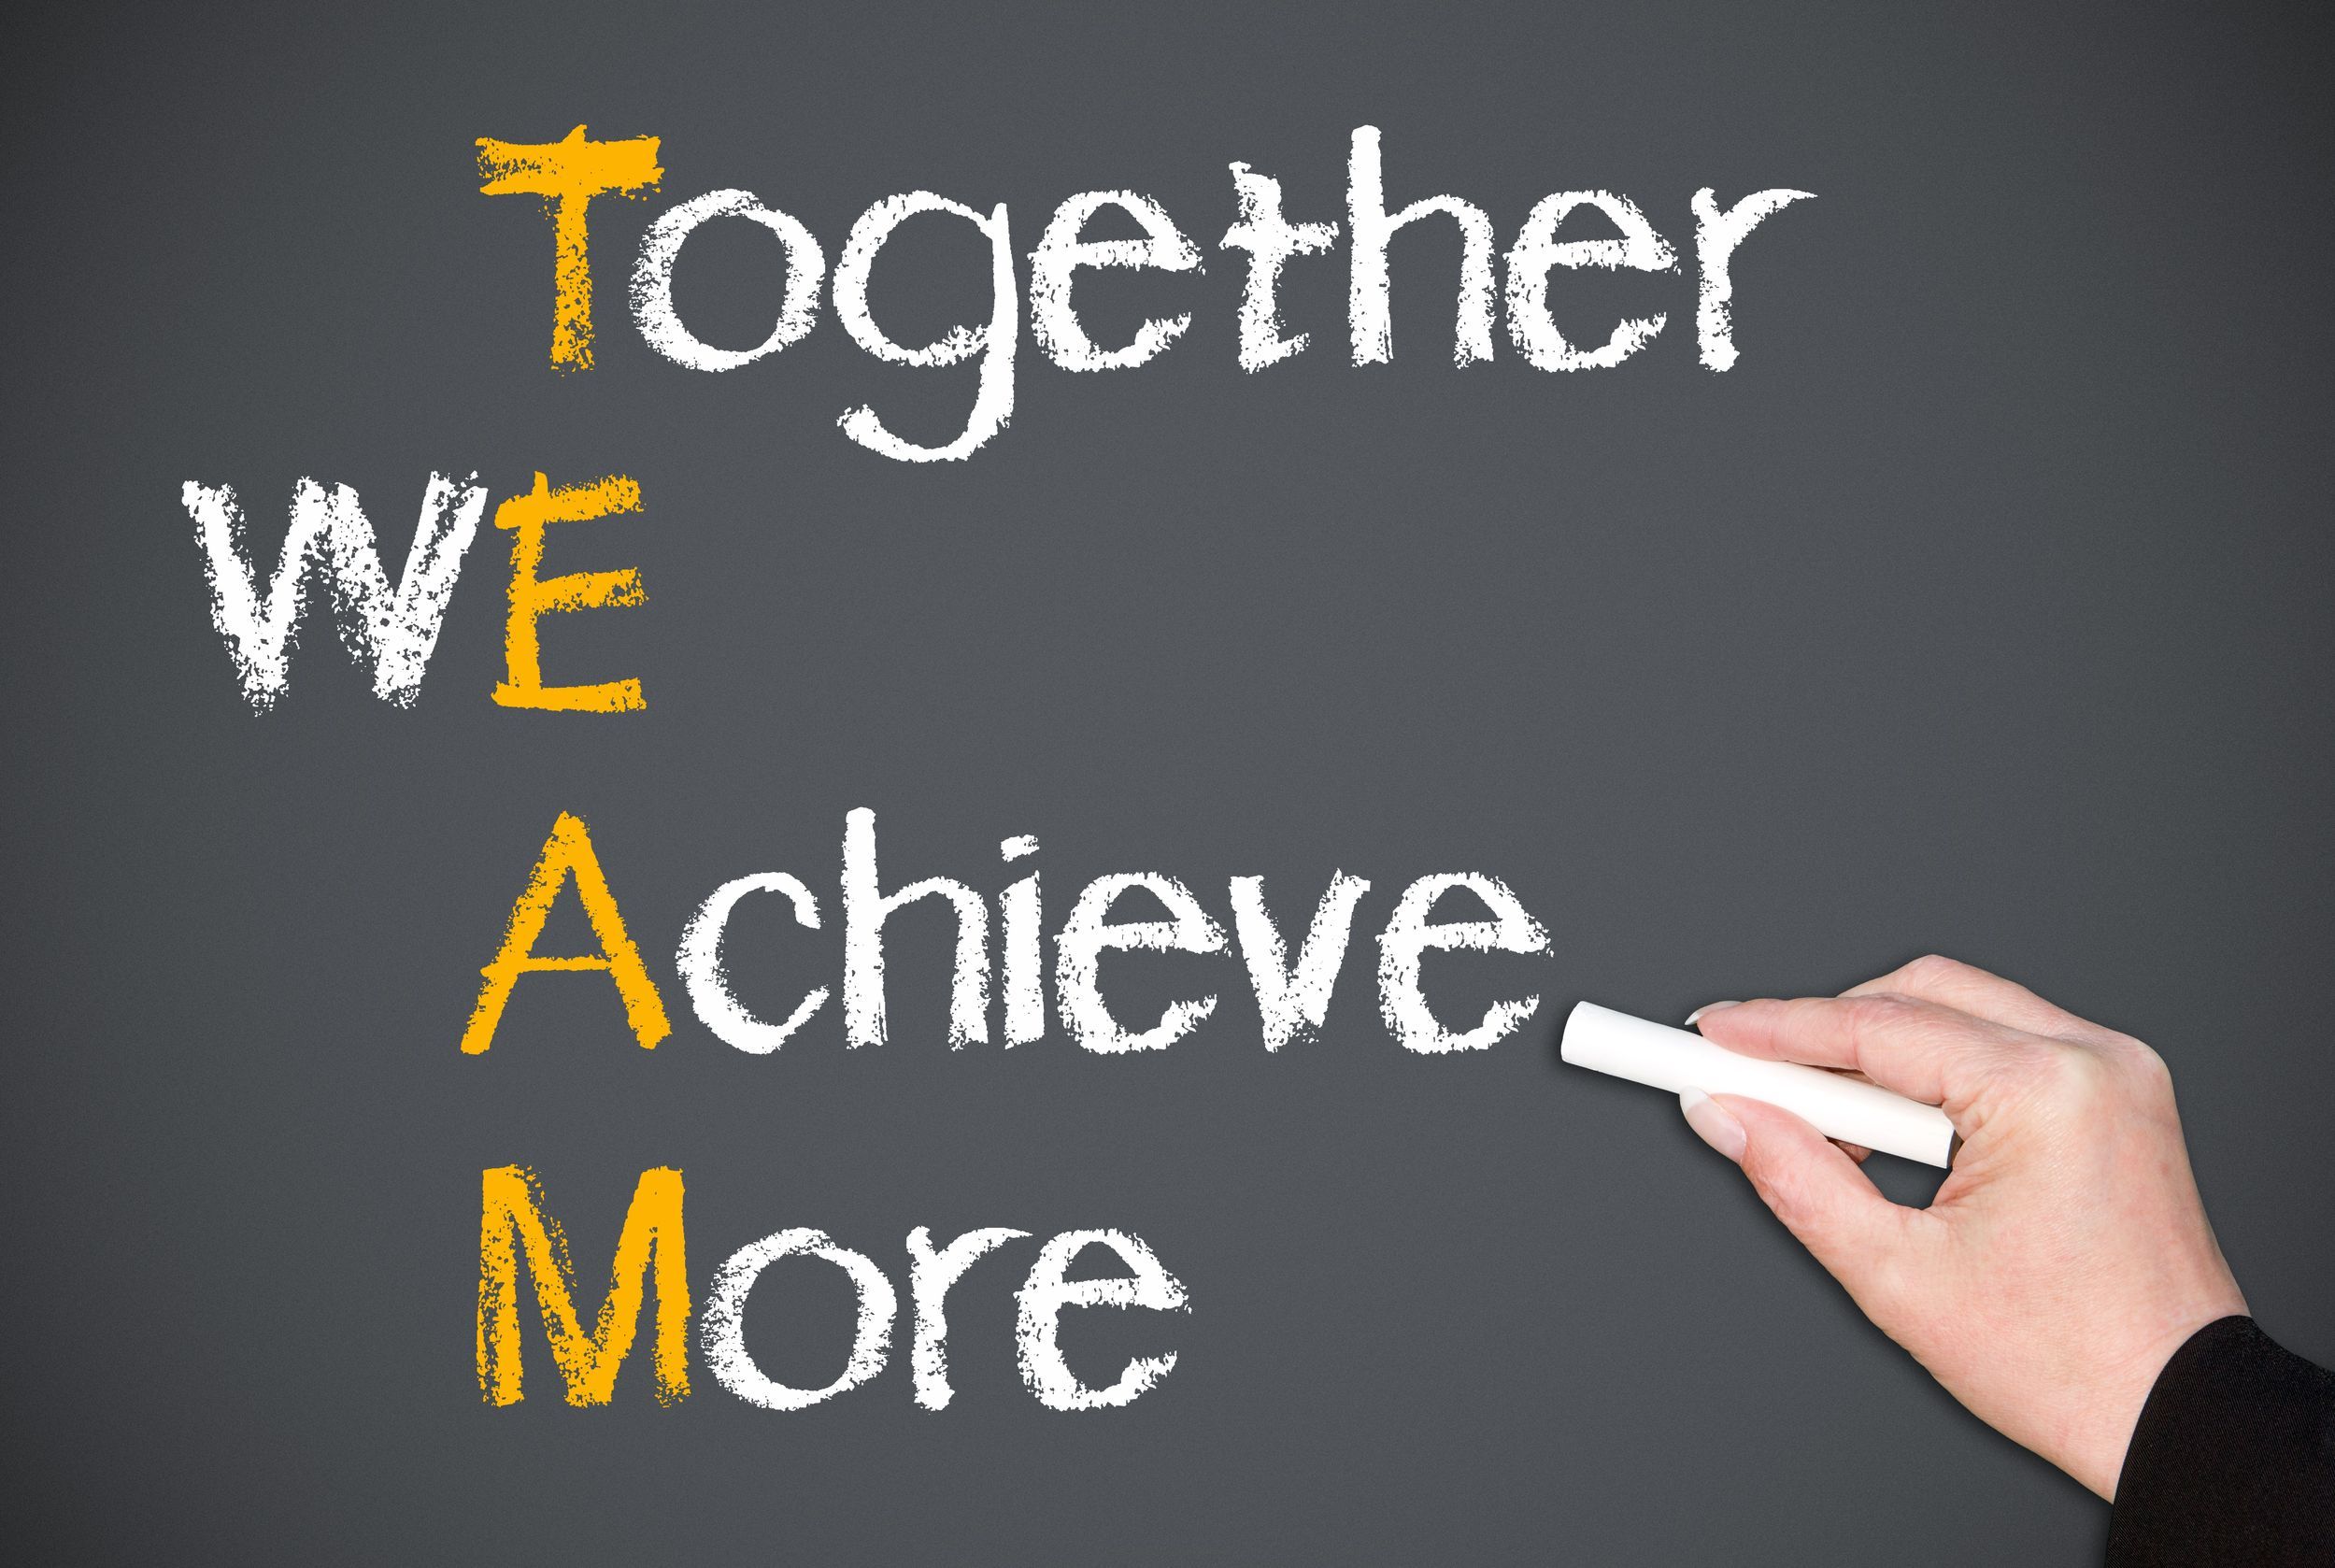 Discover These Great Teamwork Quotes for the Workplace